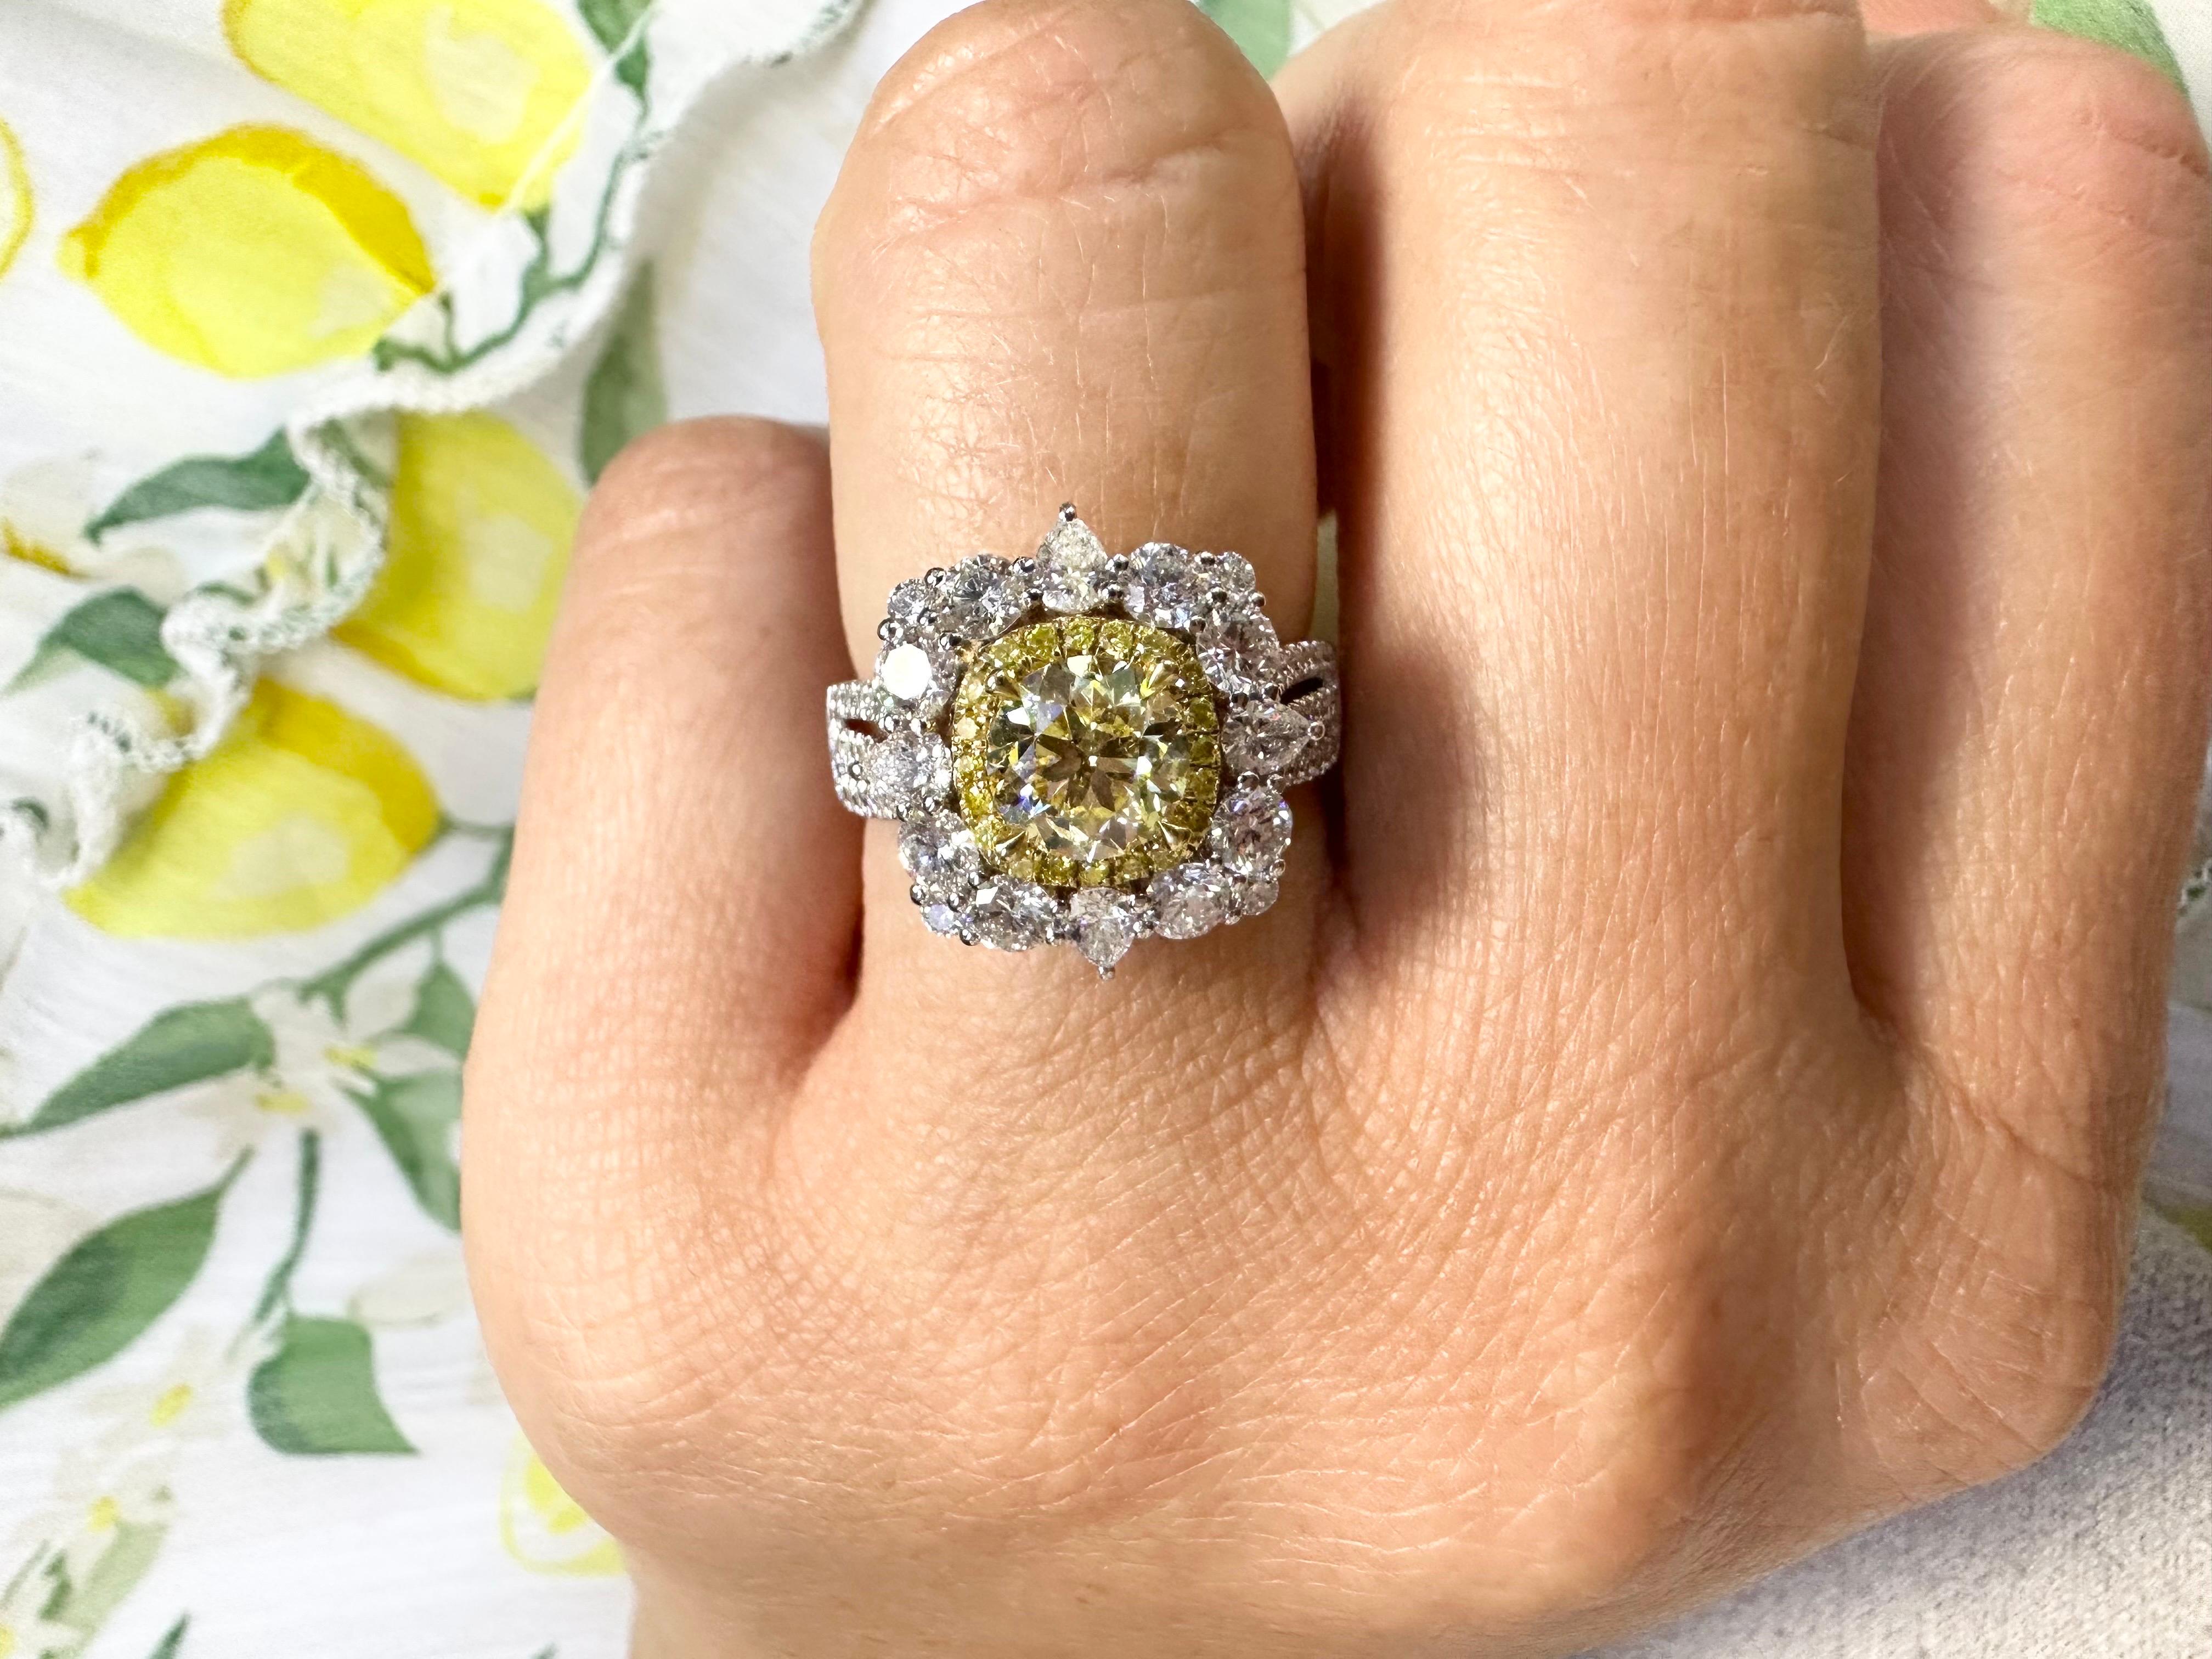 Yellow diamond engagement or cocktail ring made in 18KT white gold with excellent craftsmanship! Stunning halo with fancy yellow diamonds around center makes this ring a vivid designer ring!

Metal Type: 18KT
Gram Weight:6.37 grams 

Natural Yellow